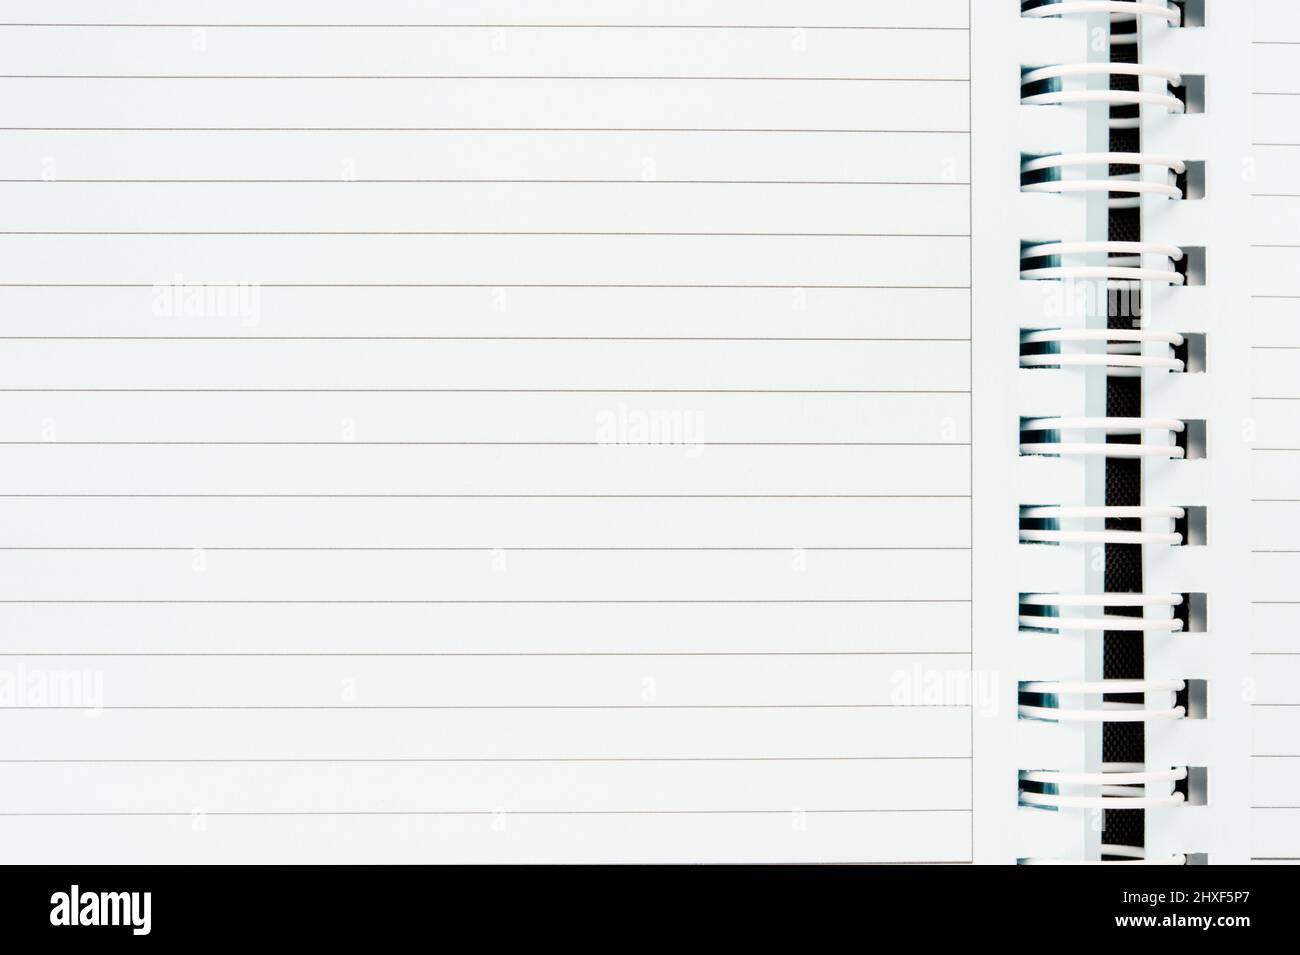 An open spiral notebook with blank page. Stock Photo